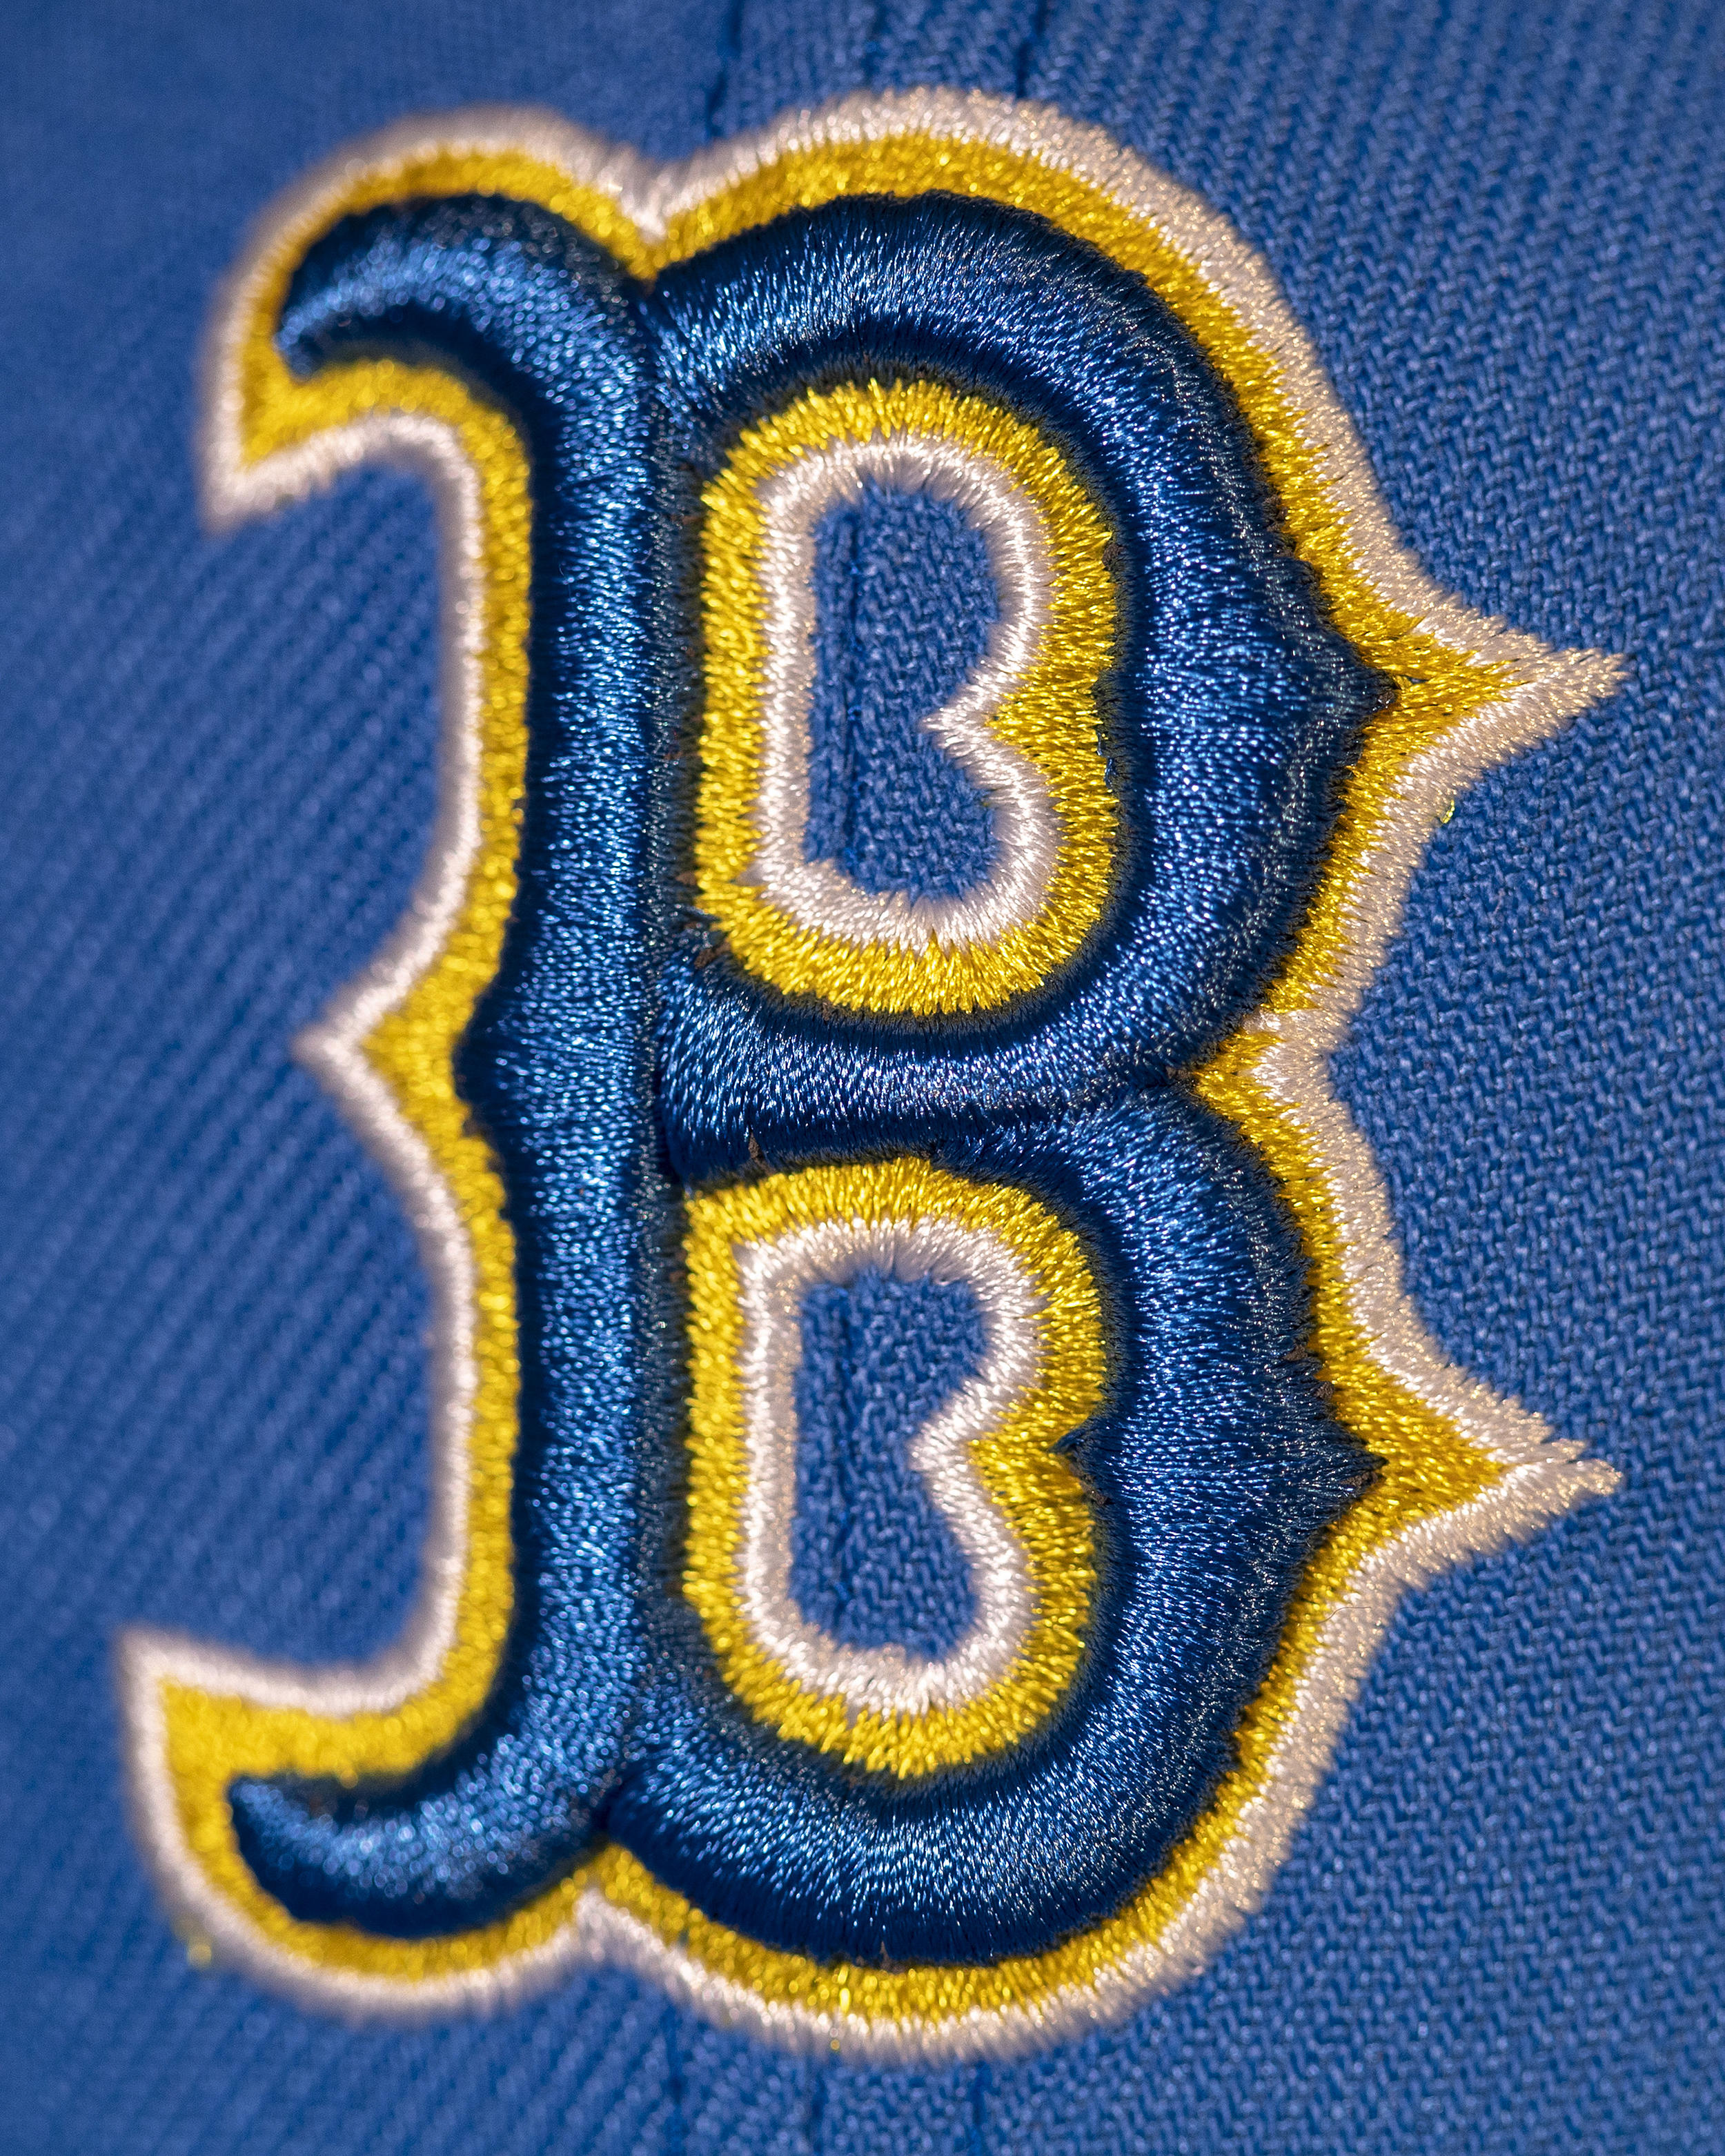 Red Sox Boston Strong Photos Archives - Billie Weiss